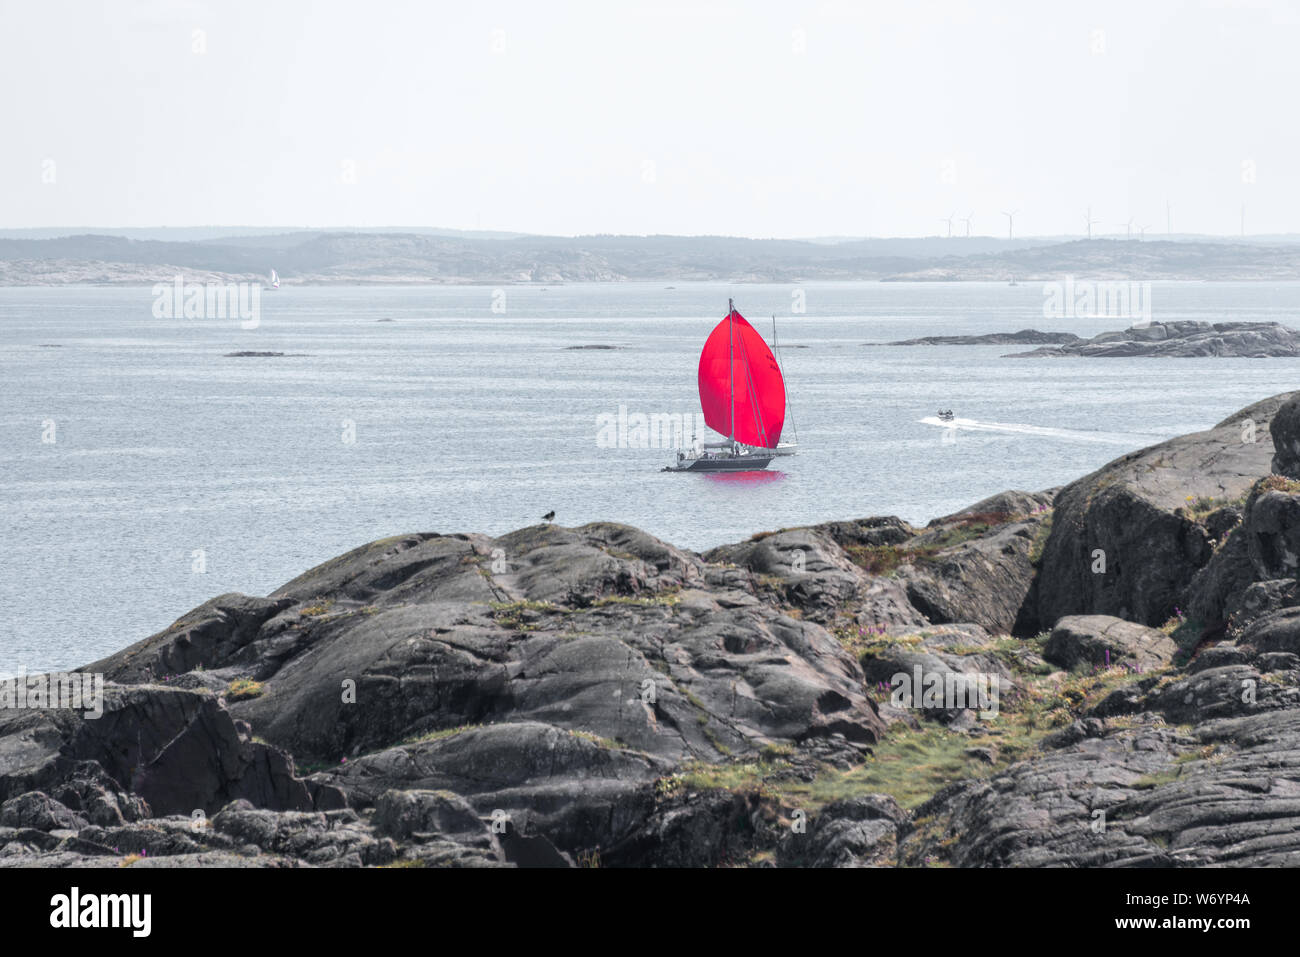 Ursholmen, Sweden - July 26, 2019: View of a sailing ship with a red sail off the island of Ursholmen in the Swedish Kosterhavet National Park in west Stock Photo